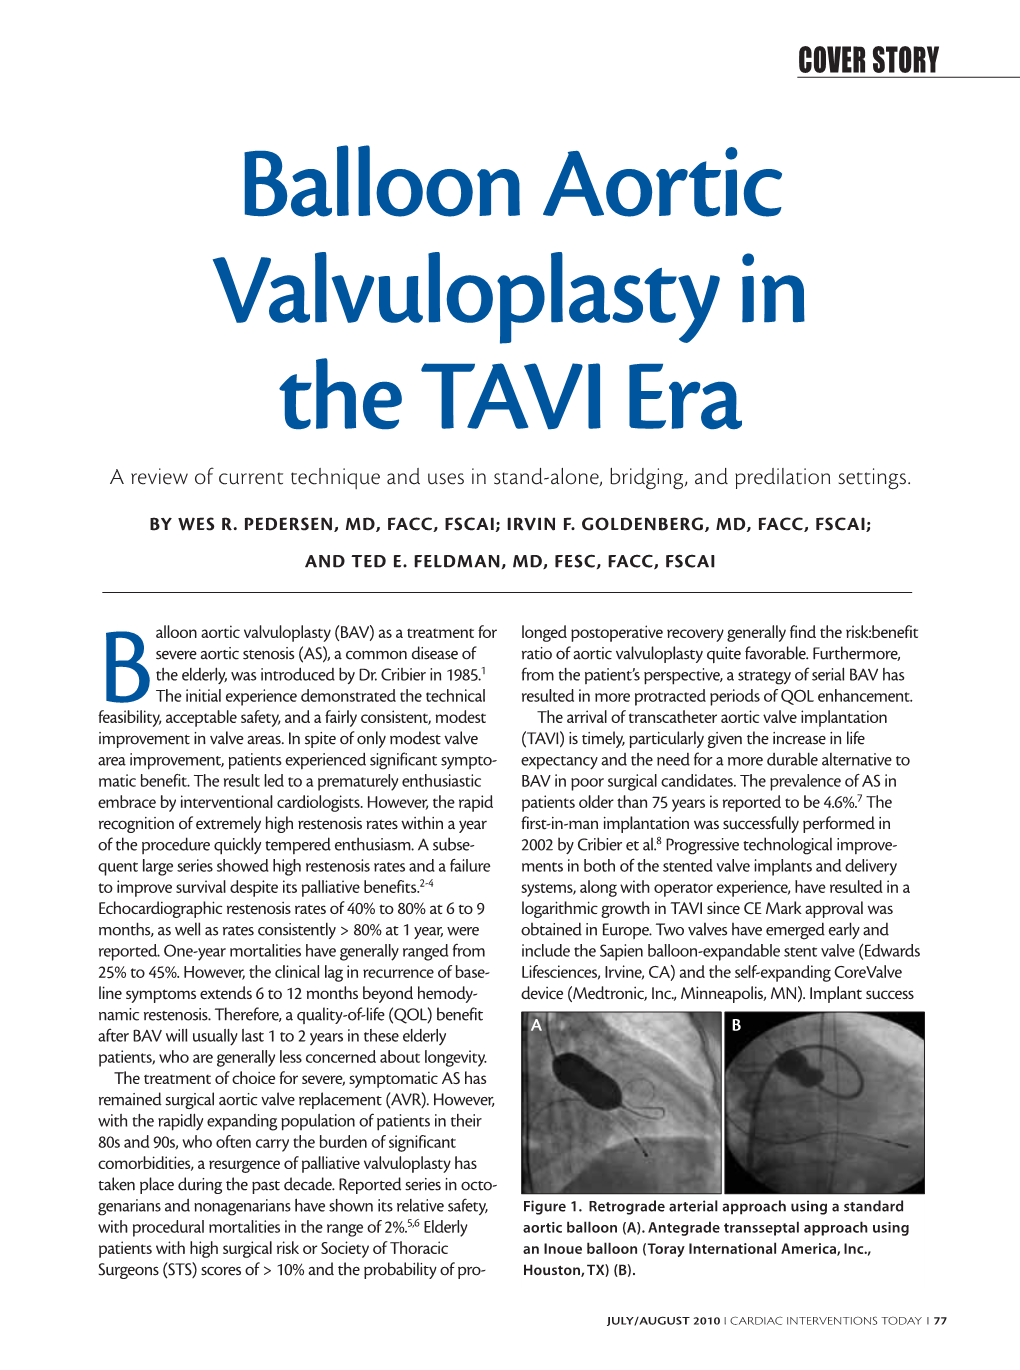 Balloon Aortic Valvuloplasty in the TAVI Era a Review of Current Technique and Uses in Stand-Alone, Bridging, and Predilation Settings